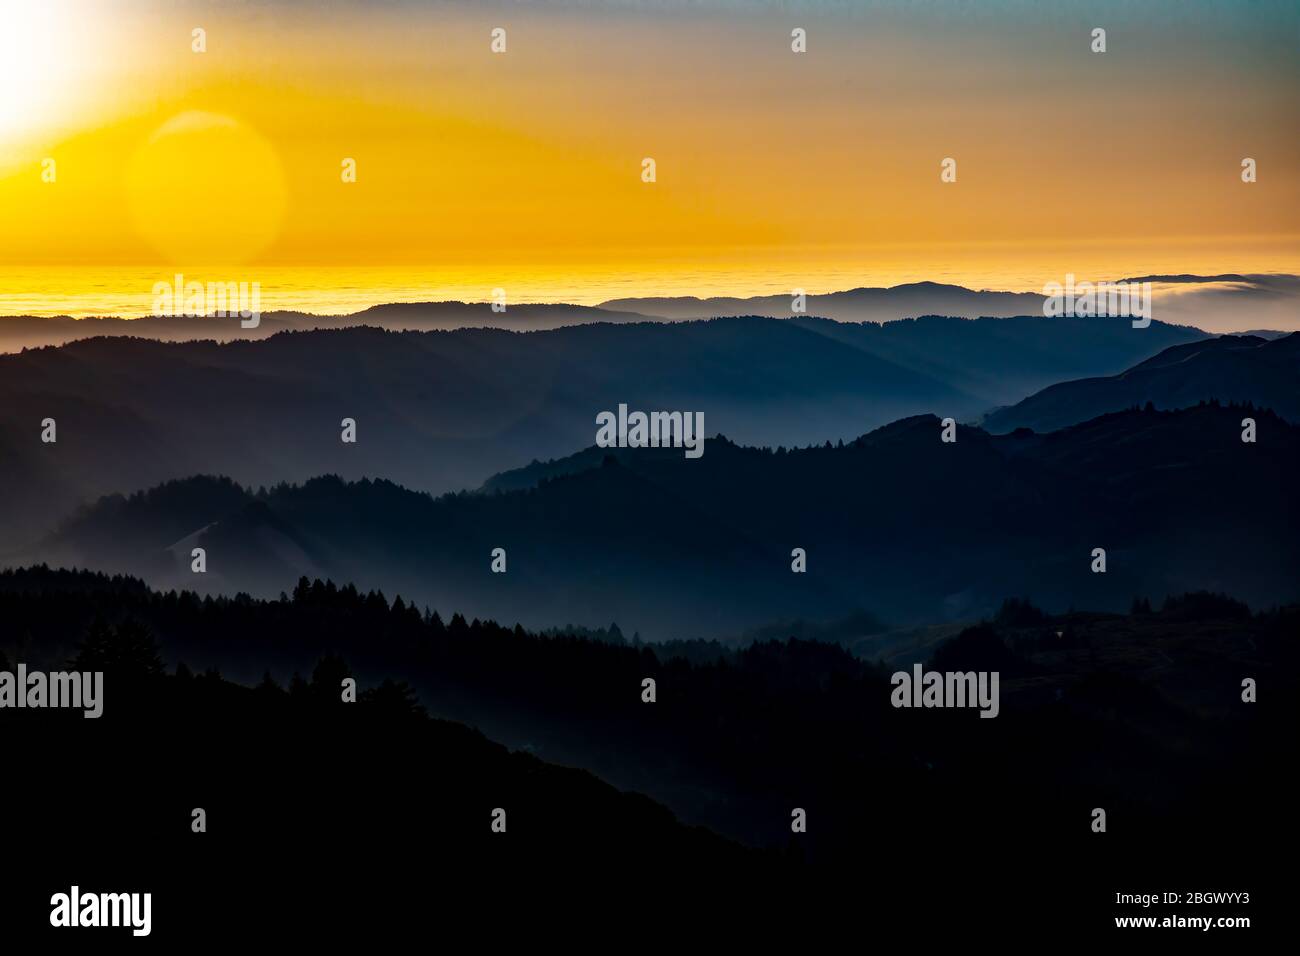 California sunset over the ocean with mountain silhouette Stock Photo